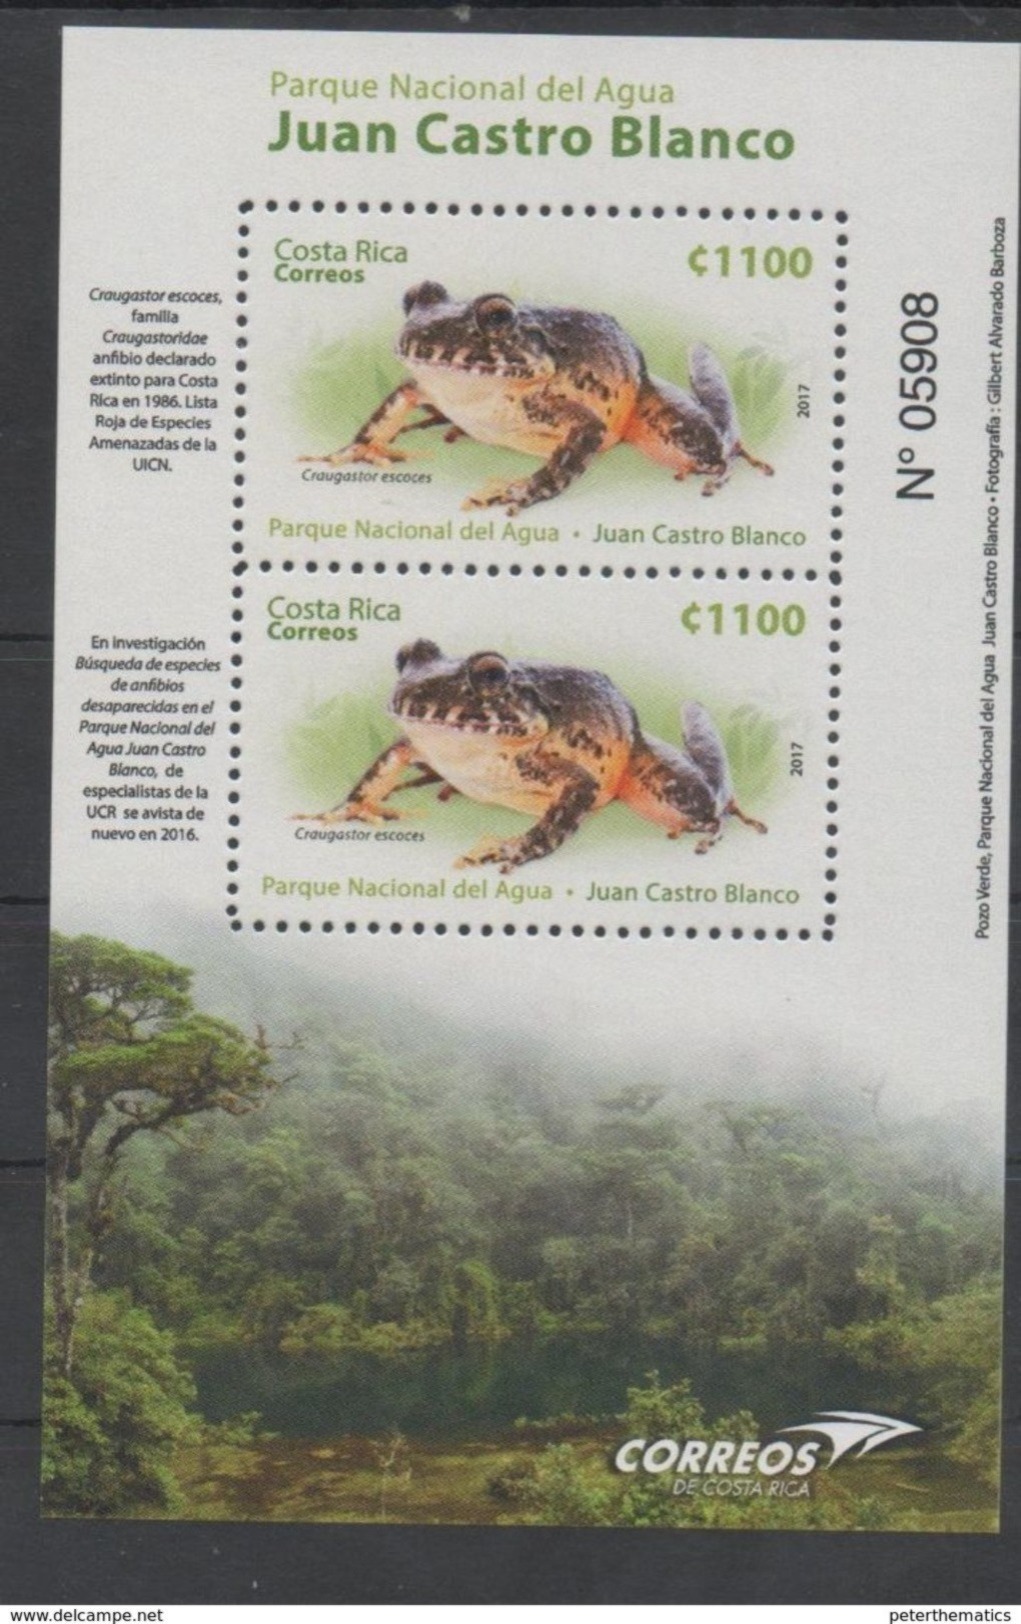 COSTA RICA, 2017, MNH, FROGS, NATIONAL PARKS, NATIONAL PARK OF JUAN CASTRO BLANCO, SHEETLET - Frogs